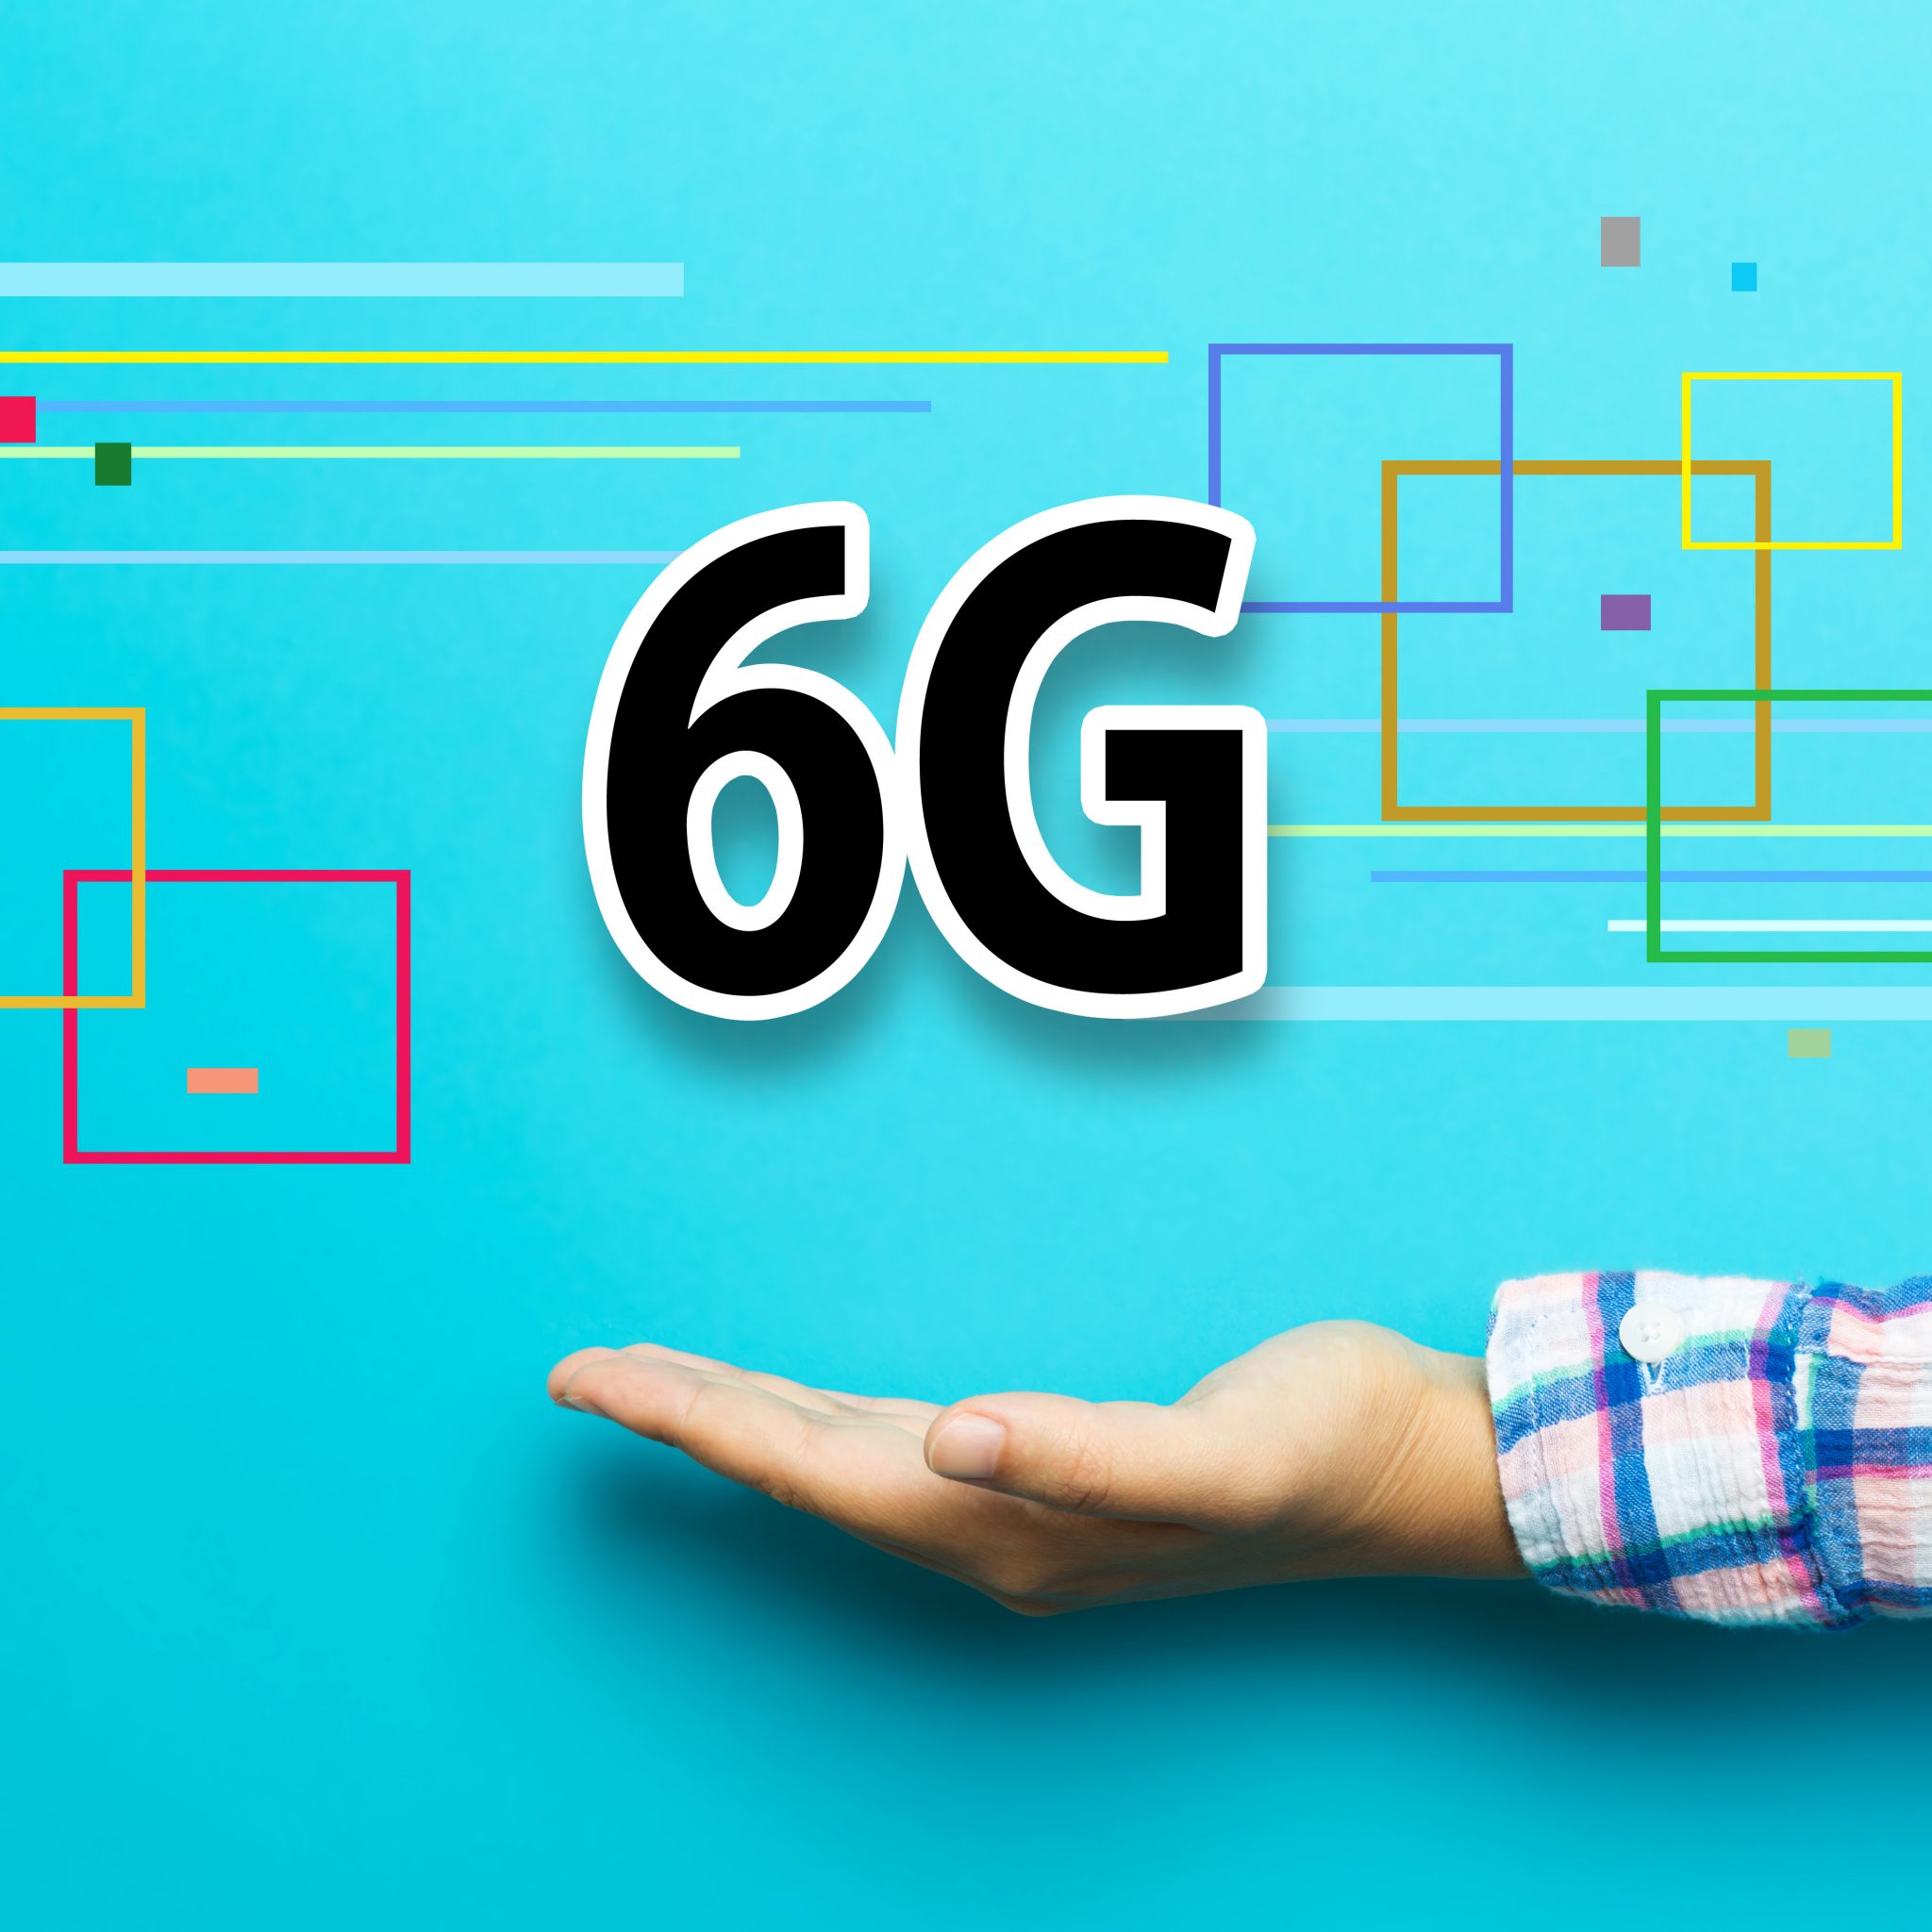 India aims to launch locally developed 6G tech in 2024: report